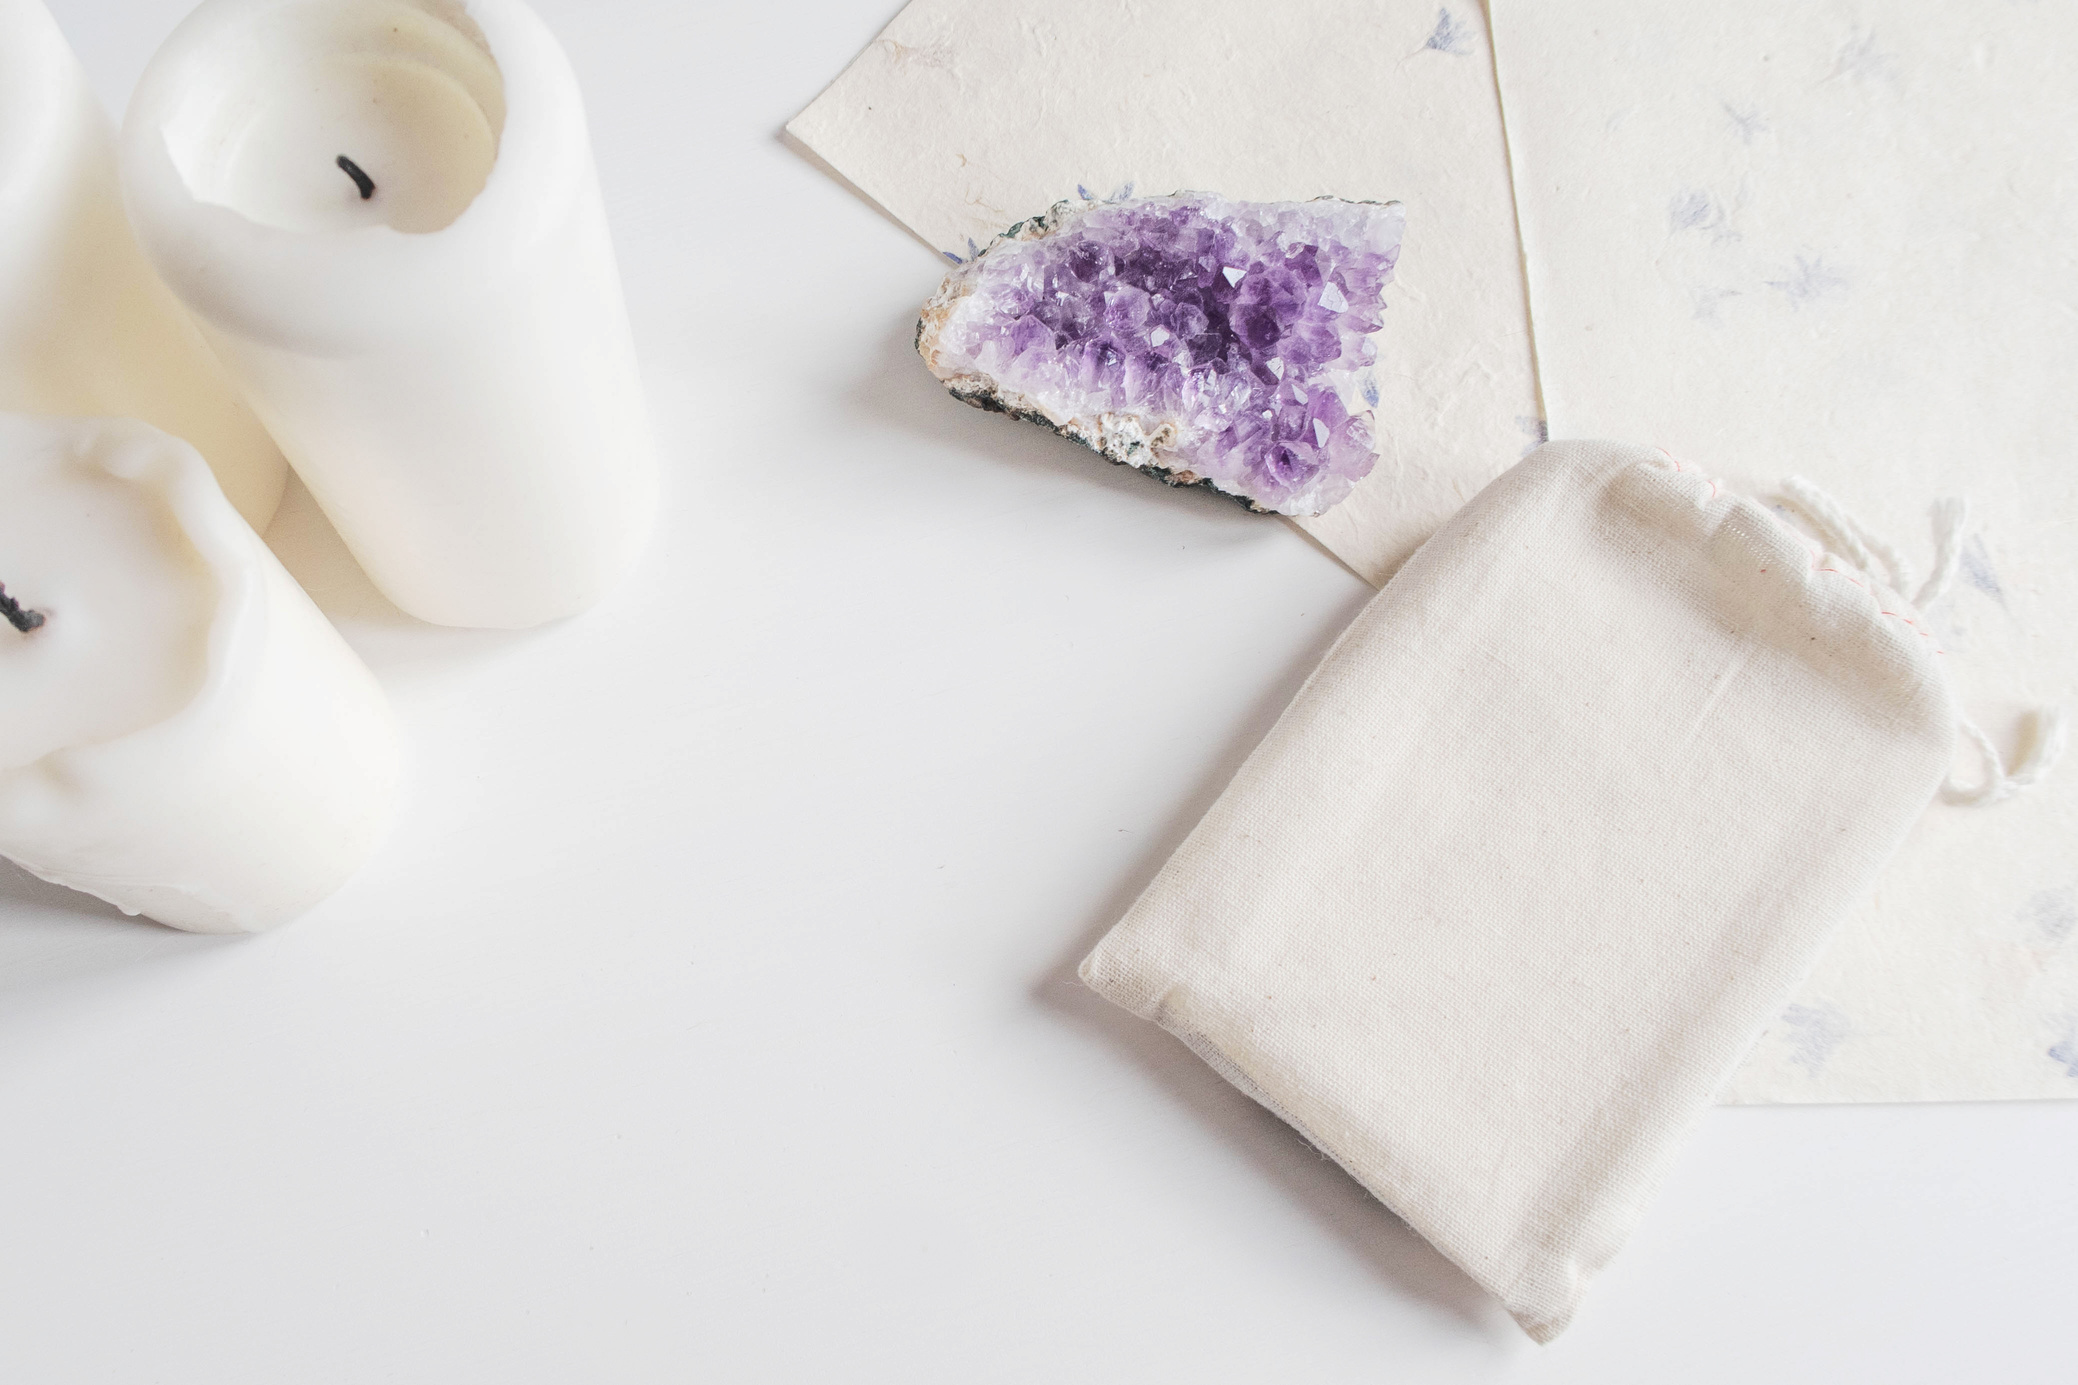 Mock up of tarot deck cotton bag, amethyst and candles on white background. Boho design of tarot cards pouch on white table